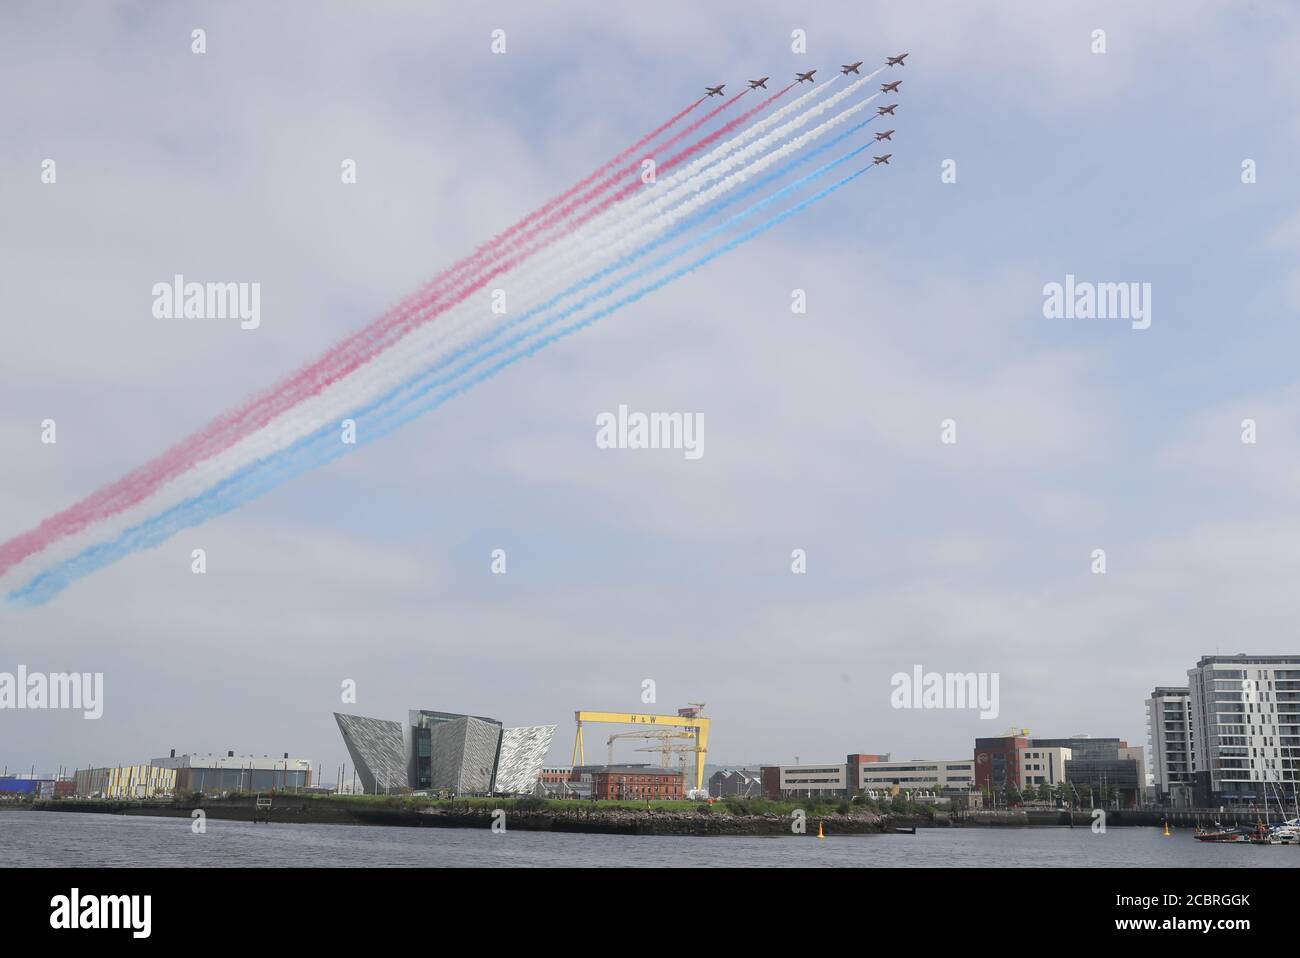 The Red Arrows fly over the Titanic slipway, the Titanic Museum and the Samson and Goliath cranes in Belfast as part of their UK-wide flypast to mark VJ Day. Stock Photo